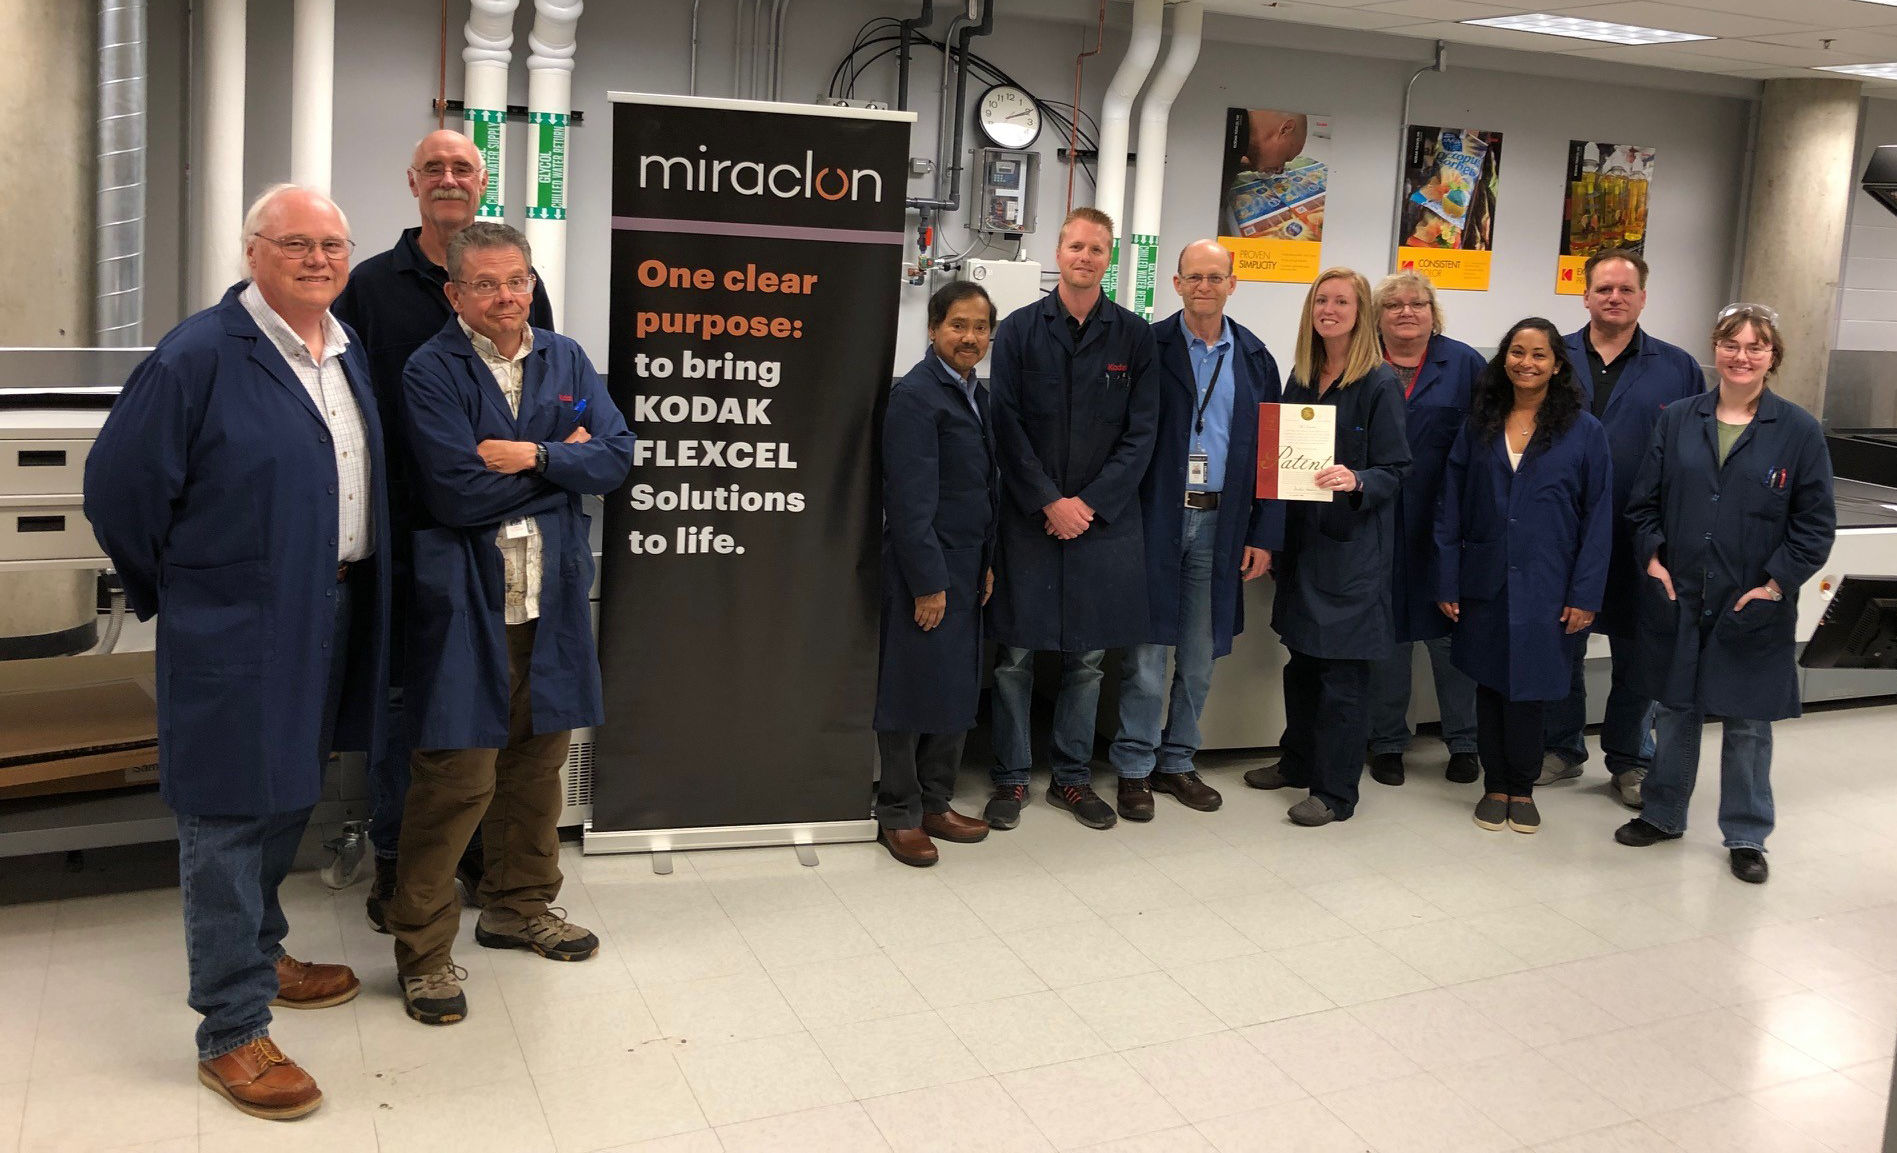 R&D Scientists at Miraclon Recognized for Outstanding Innovation for the KODAK FLEXCEL NX Ultra Solution